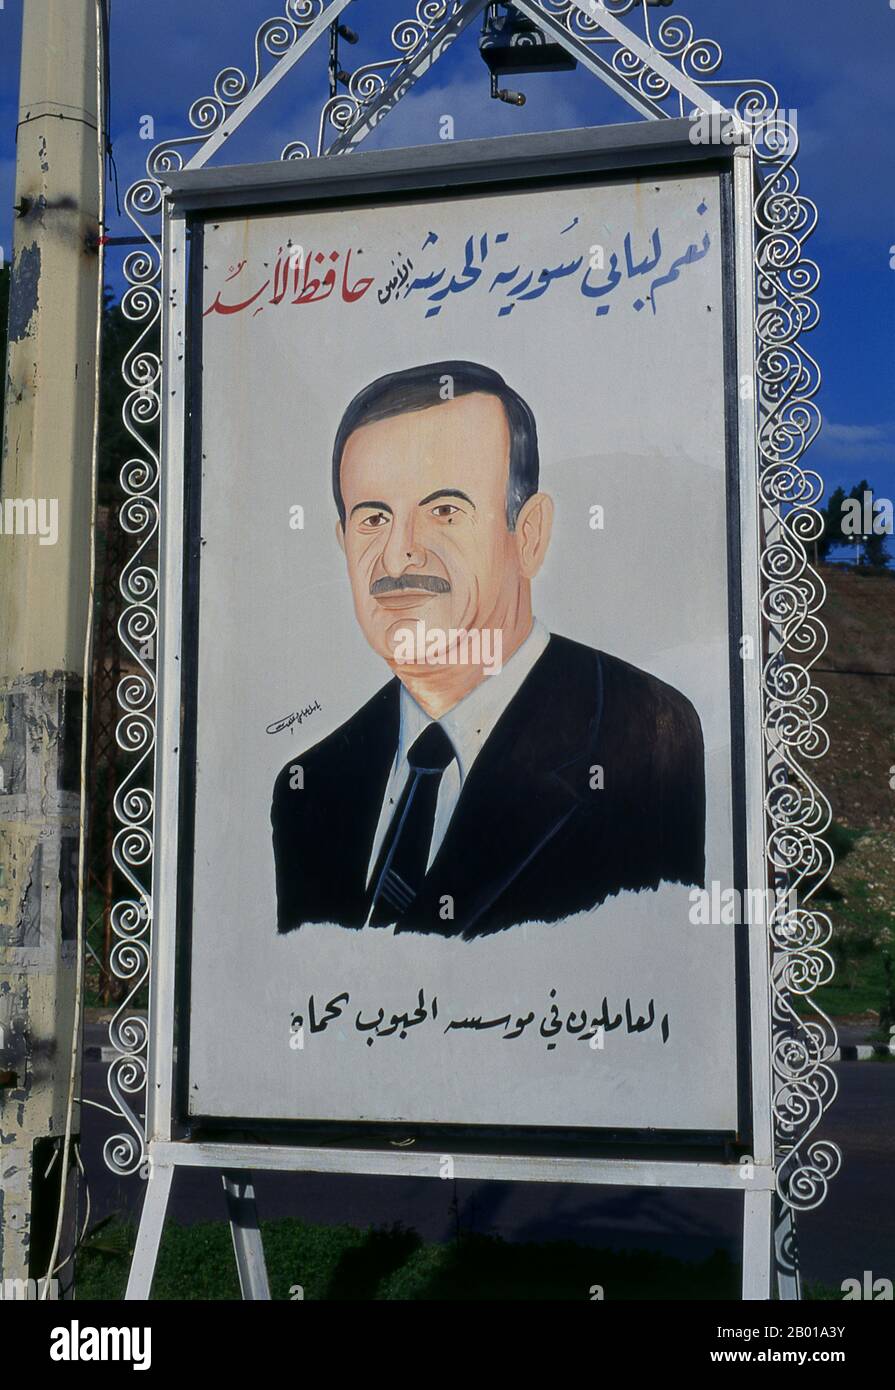 Syria: Hafez al-Assad (6 October 1930 - 10 June 2000), President of Syria (r. 1971-2000).  Hafez al-Assad was the President of Syria for three decades. Assad's rule was praised for consolidating the power of the central government after decades of coups and counter-coups. He also drew criticism for repressing his own people, in particular for ordering the Hama massacre of 1982, which has been described as 'the single deadliest act by any Arab government against its own people in the modern Middle East'. Human Rights groups have detailed thousands of extra-judicial executions he ordered. Stock Photo